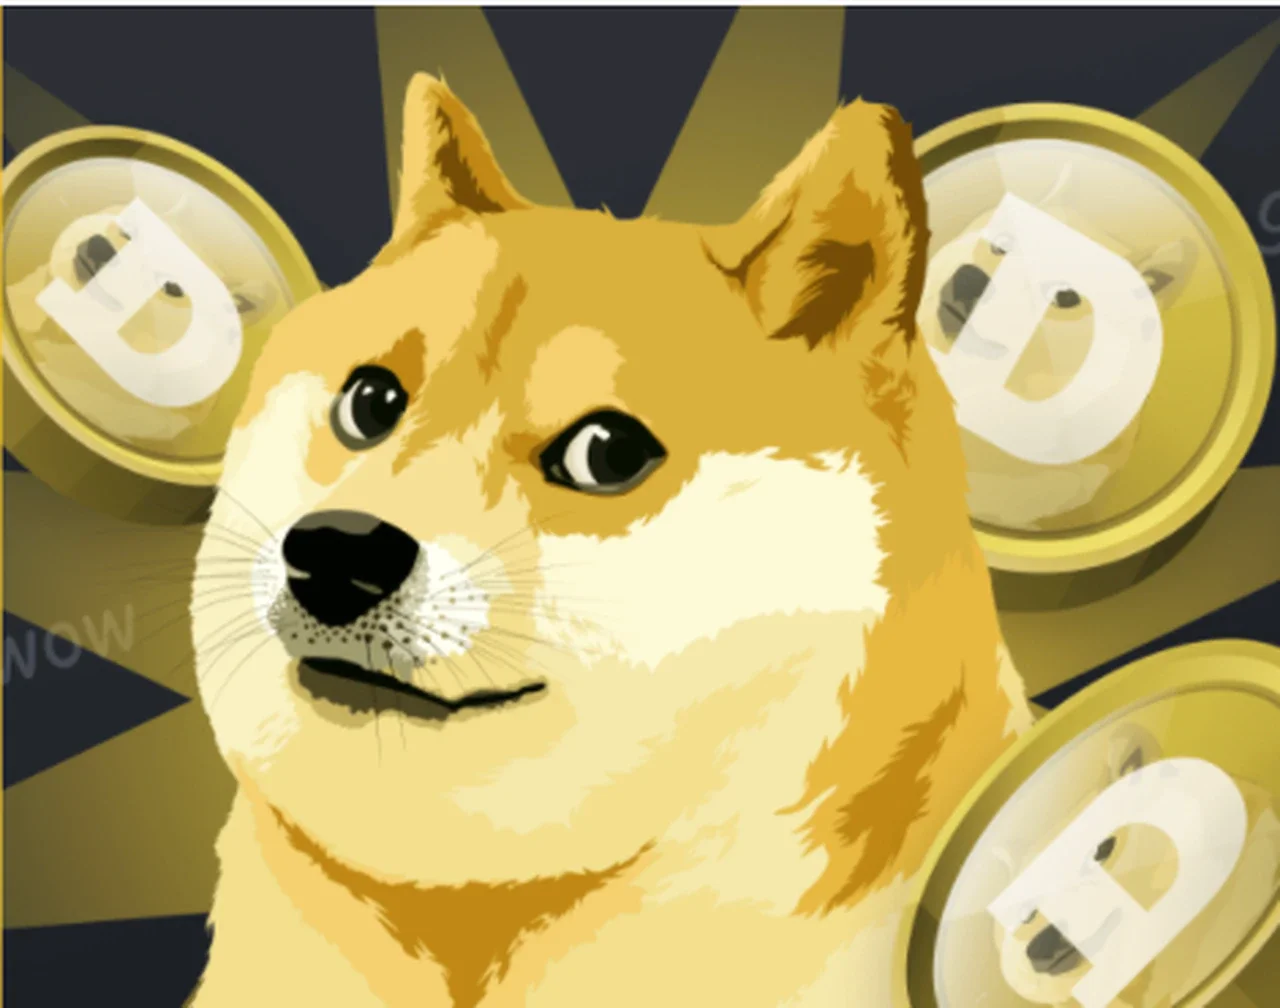 SHIBA INU HYPE IS OVER, BITGERT IS TAKING OVER IT